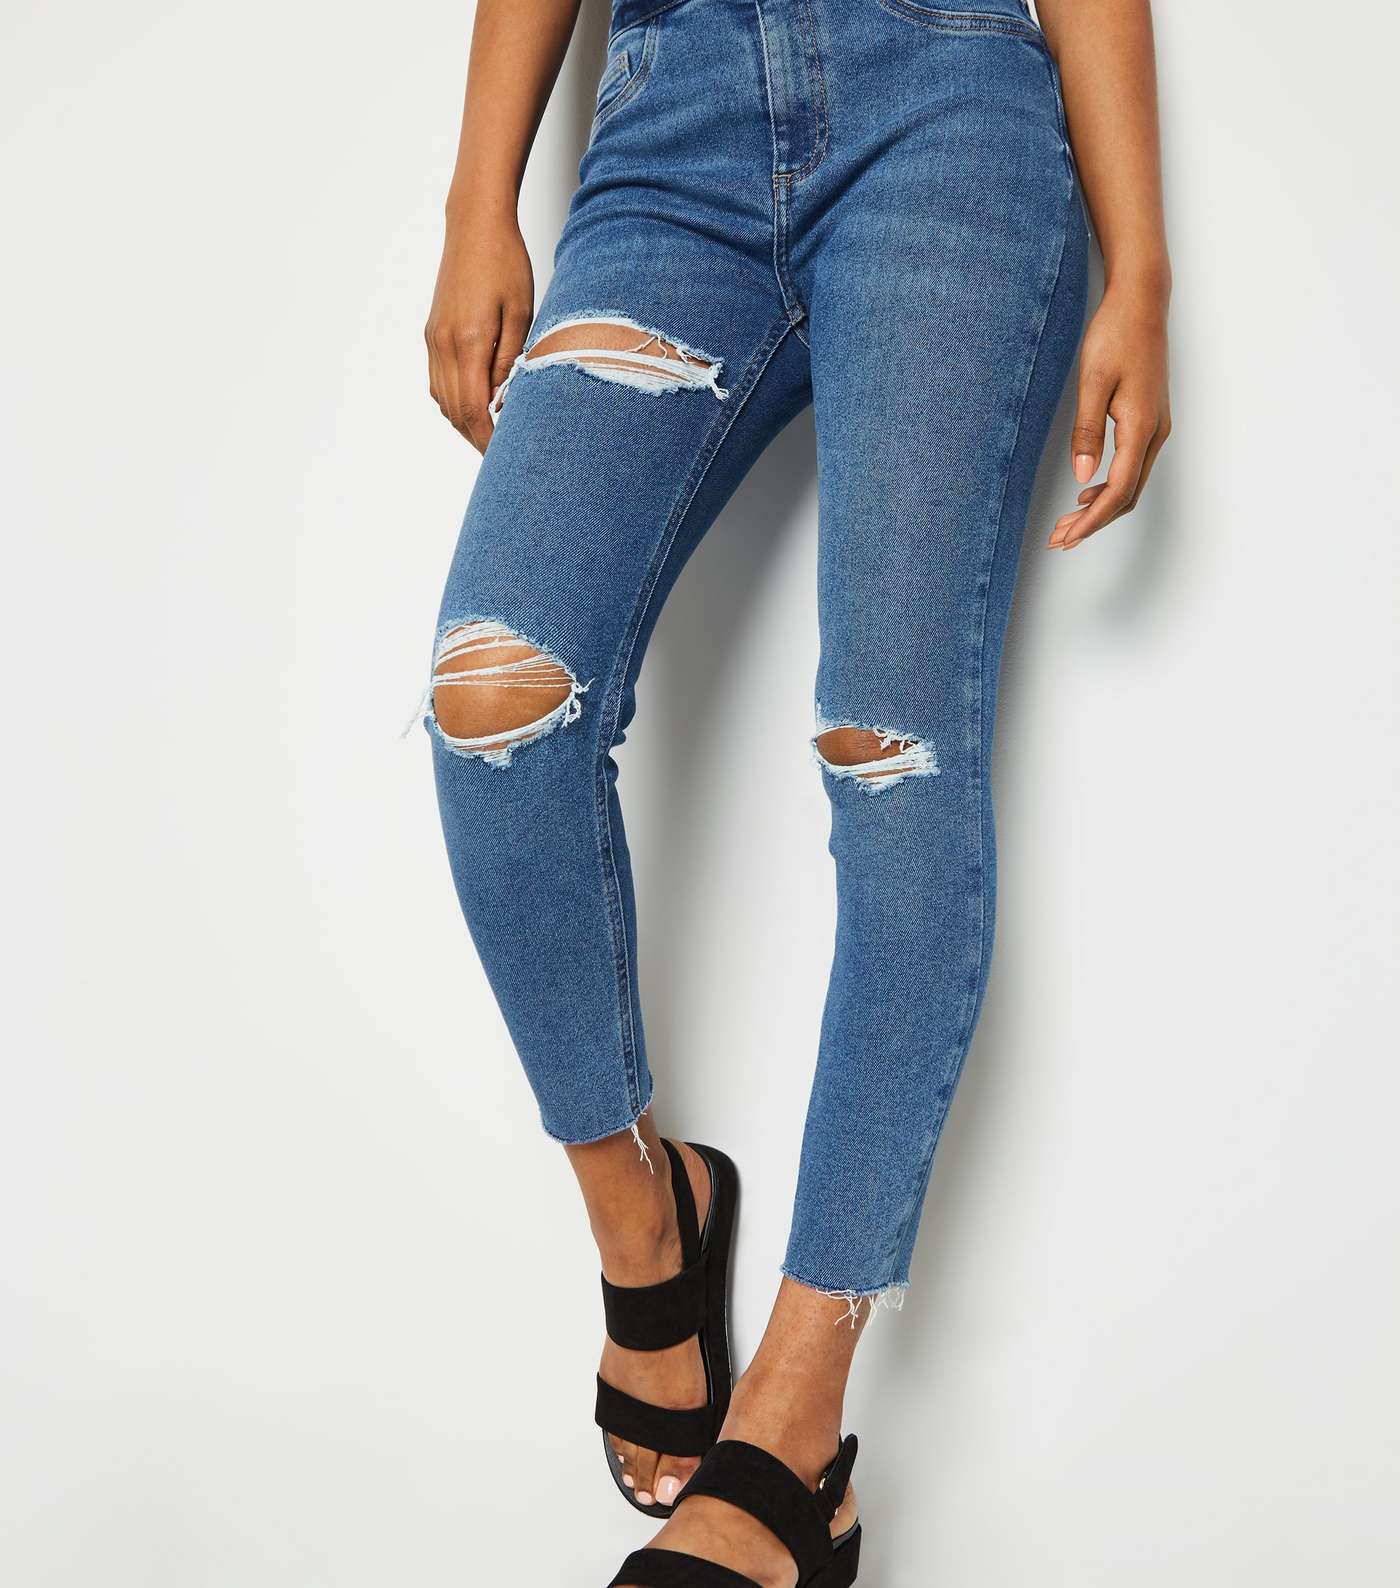 Petite Teal Ripped High Waist Super Skinny Jeans Image 5